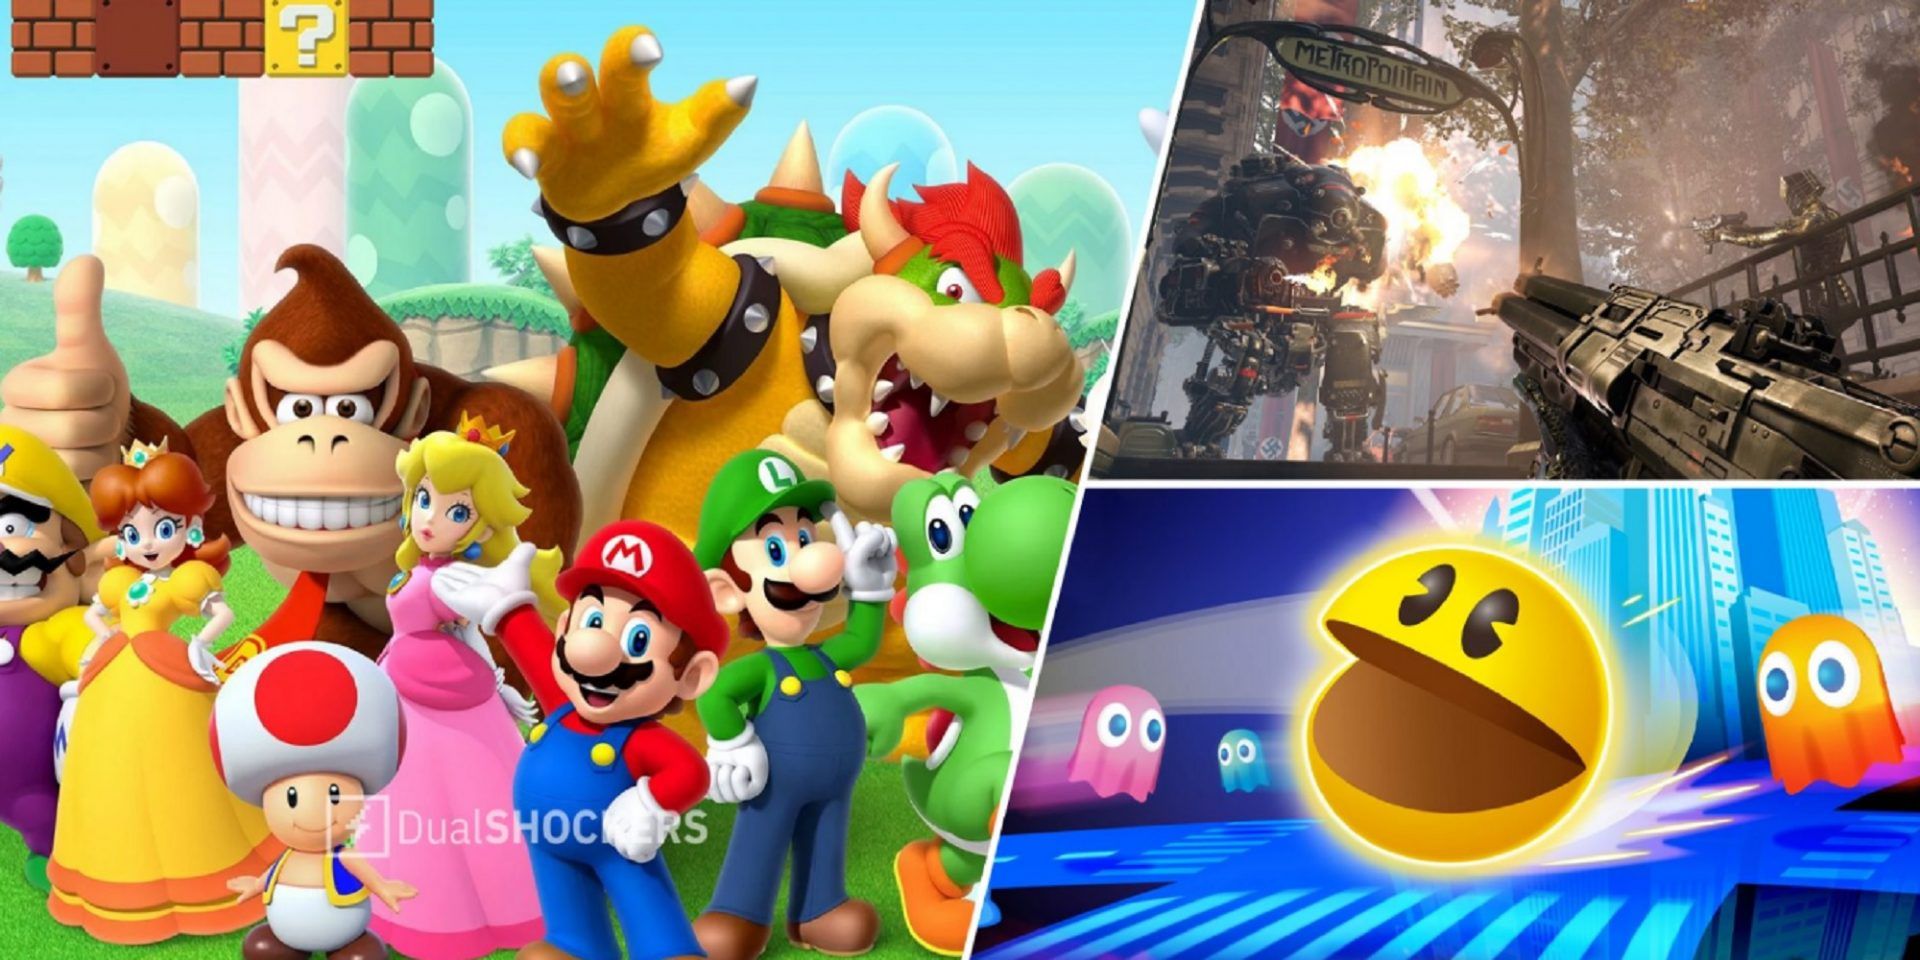 Split image Super Mario franchises characters group shot, Wolfenstein Youngblood screenshot in combat with foe and Pac-Man pursued by ghosts